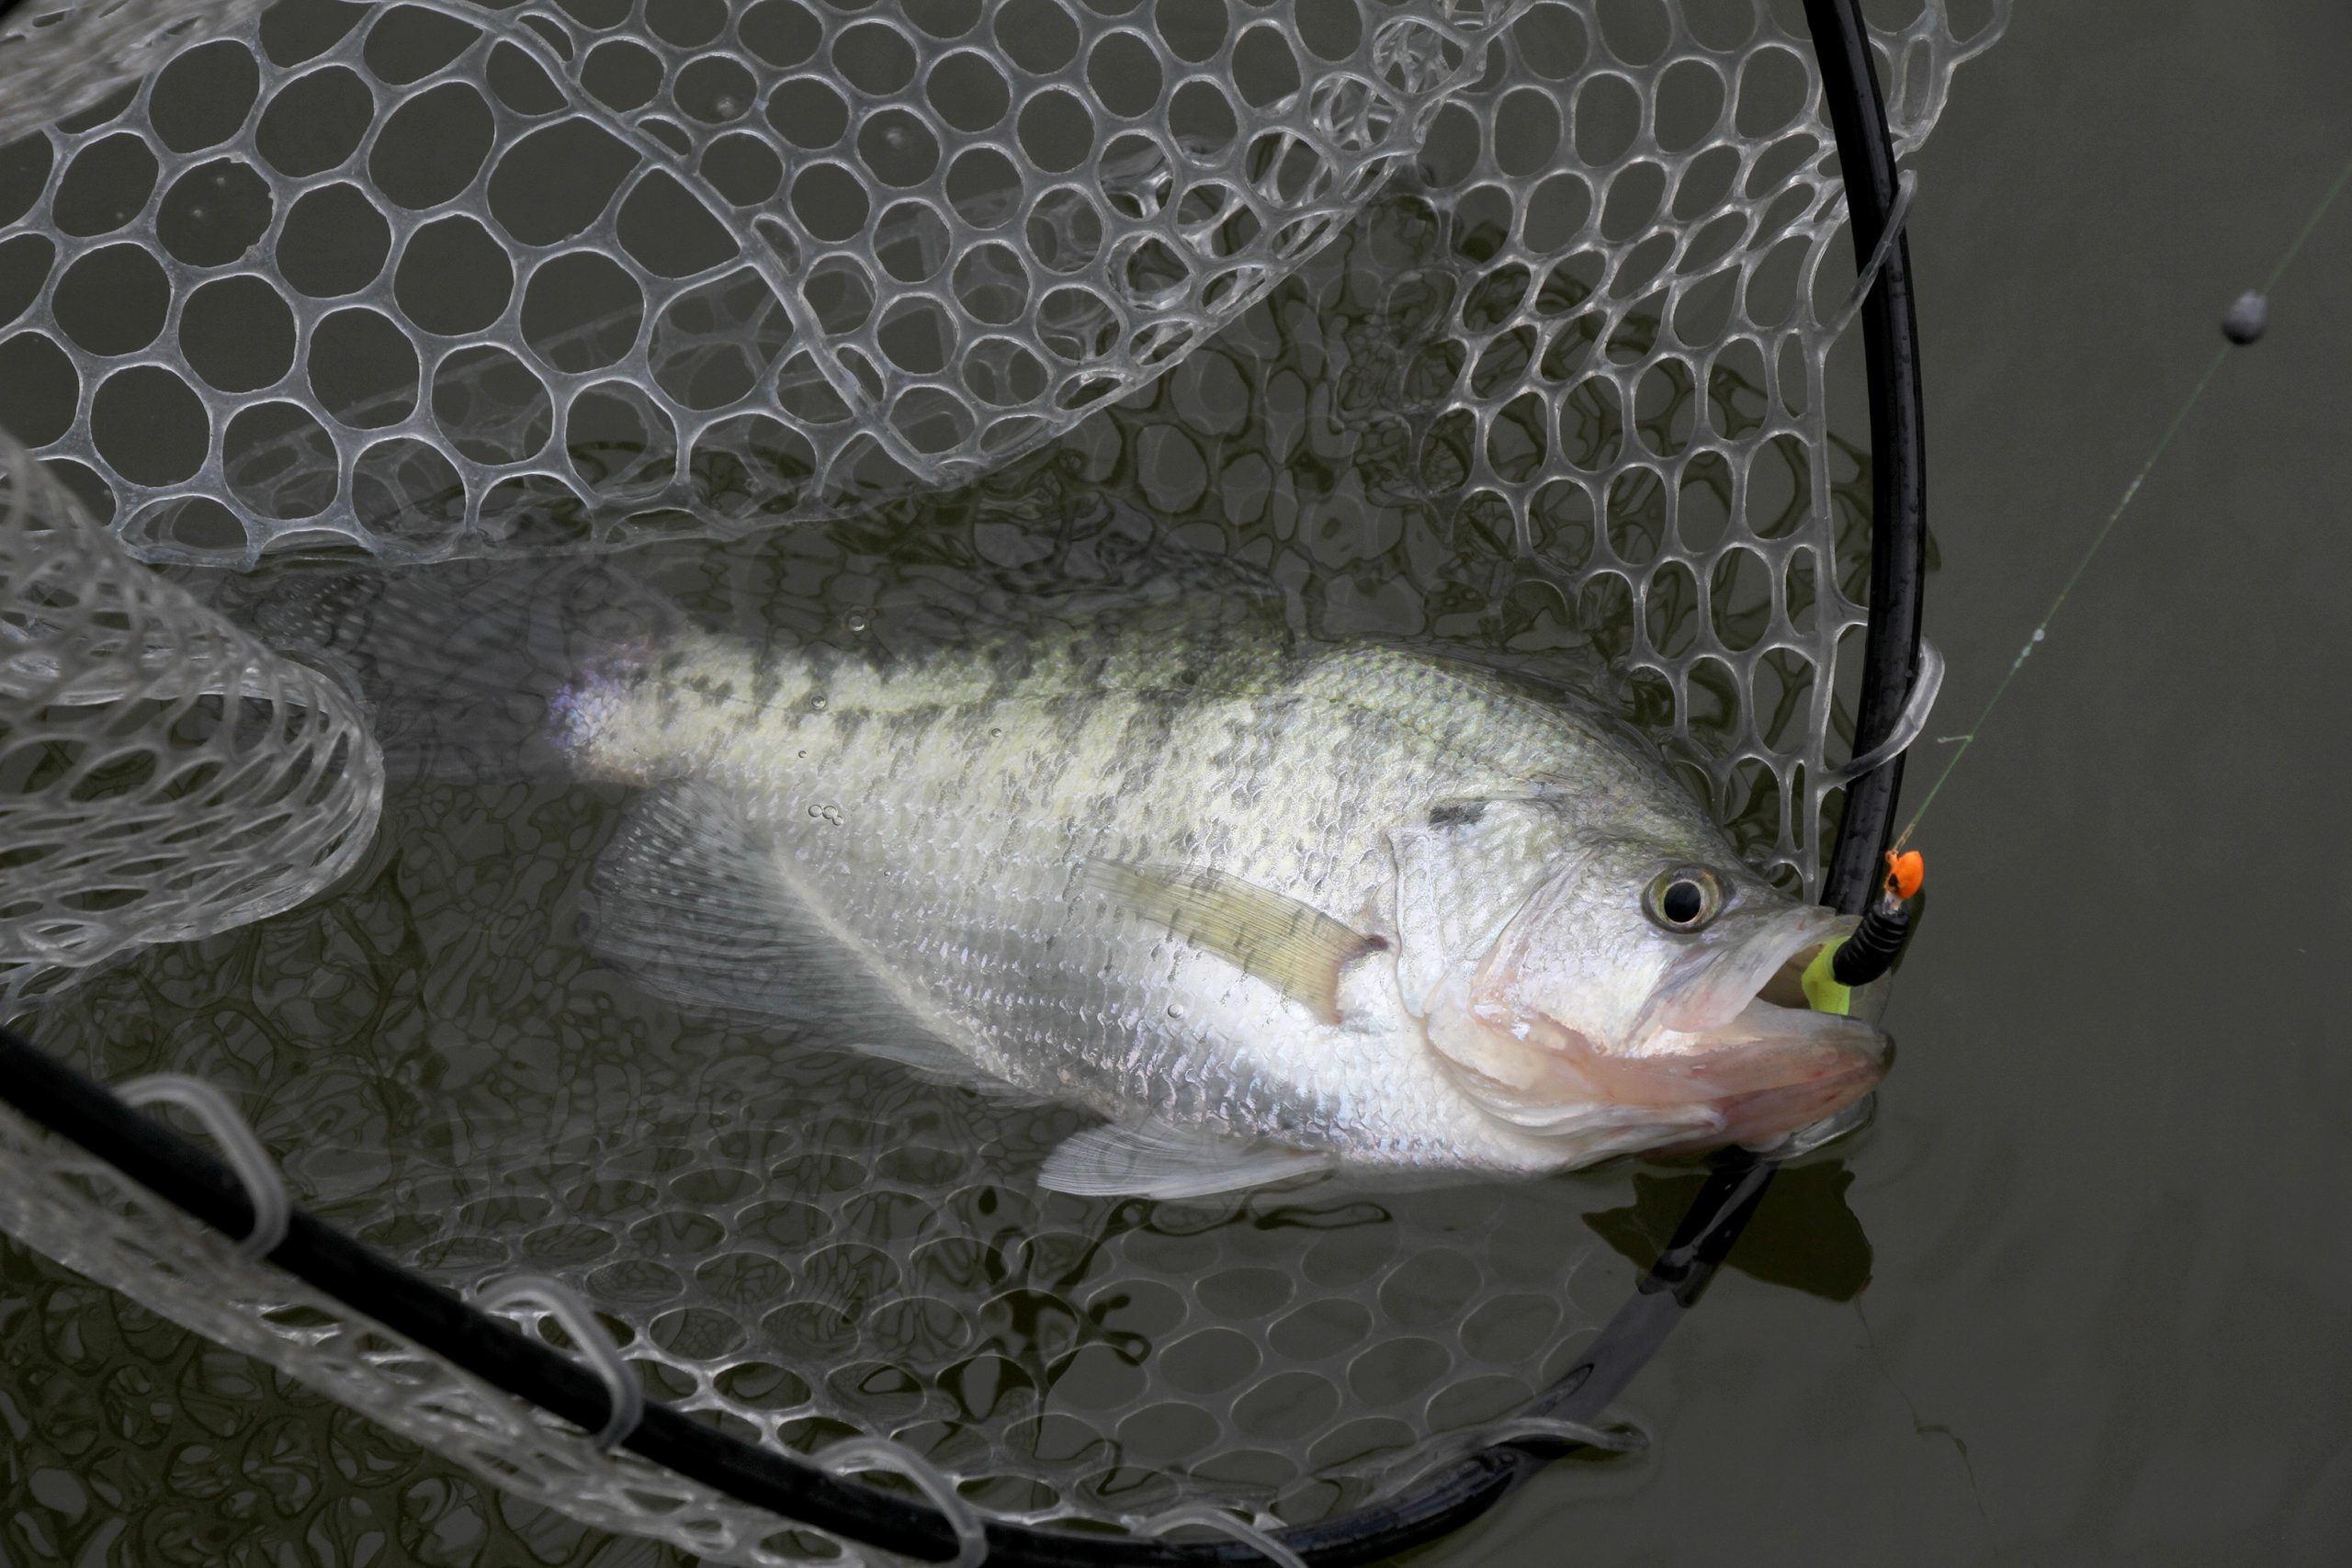 Pitts hooked On winter crappie fishing on Coosa Reservoirs